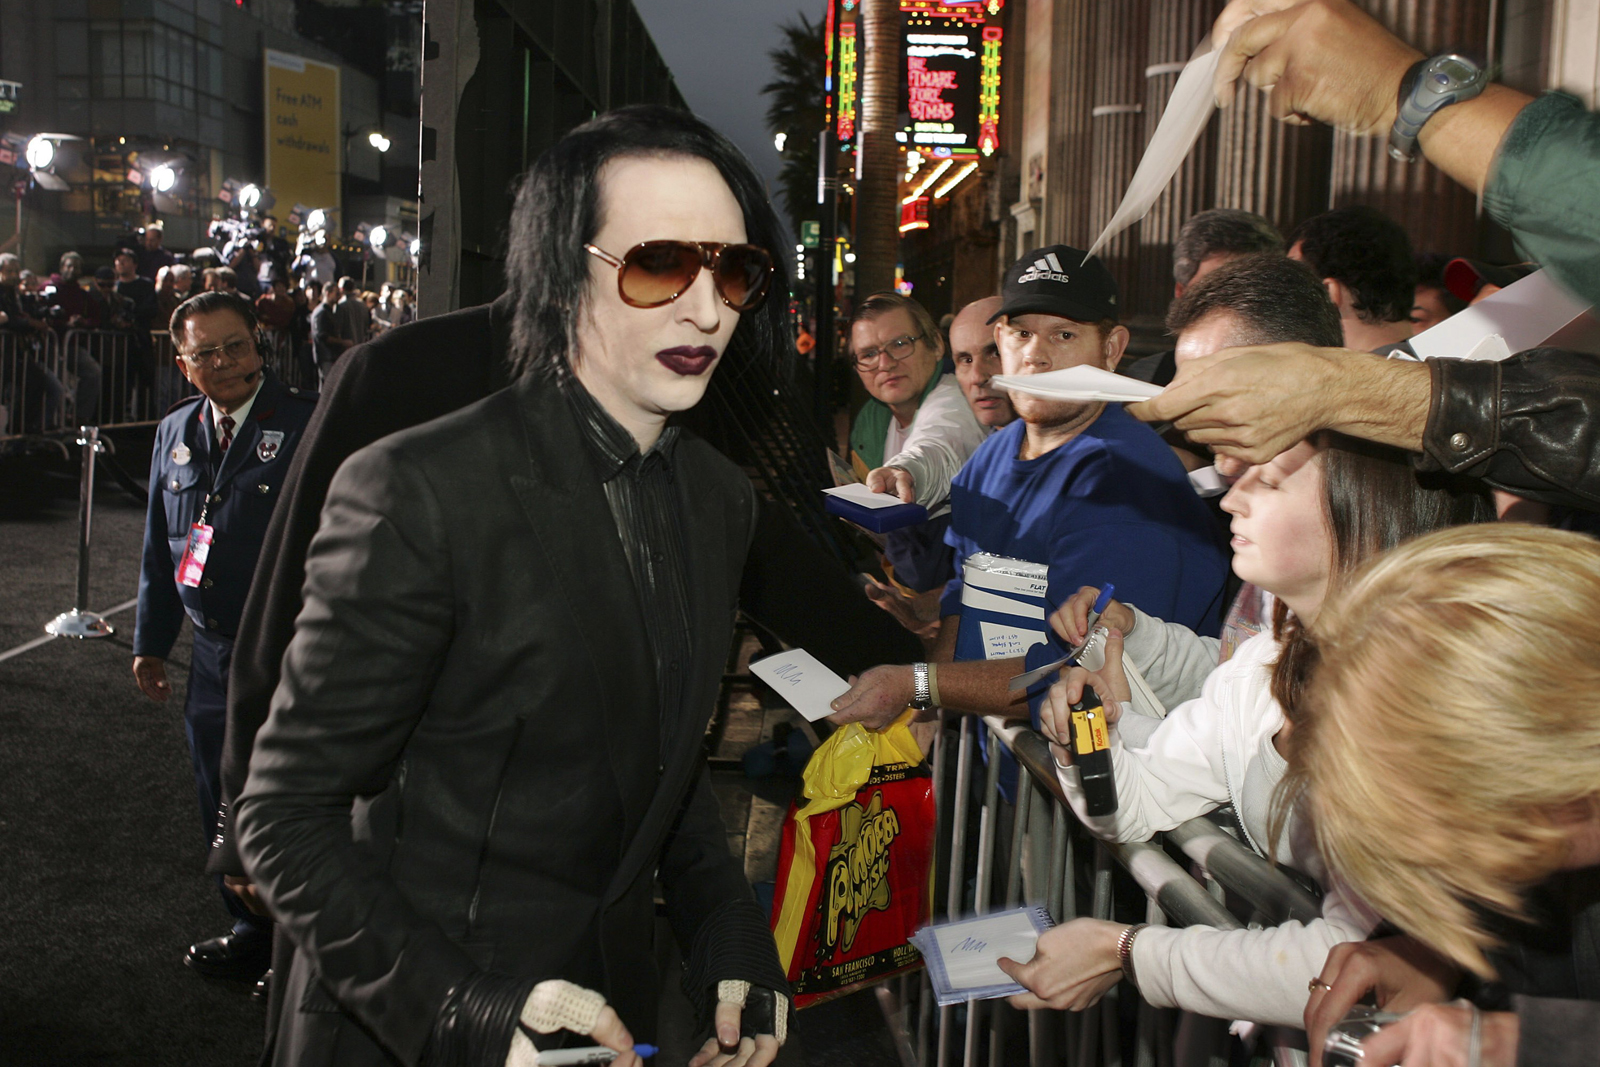 Macintosh HD:Users:brittanyloeffler:Downloads:Upwork:Marilyn Manson:2-He-let-a-dying-fan-be-part-of-his-music.jpg